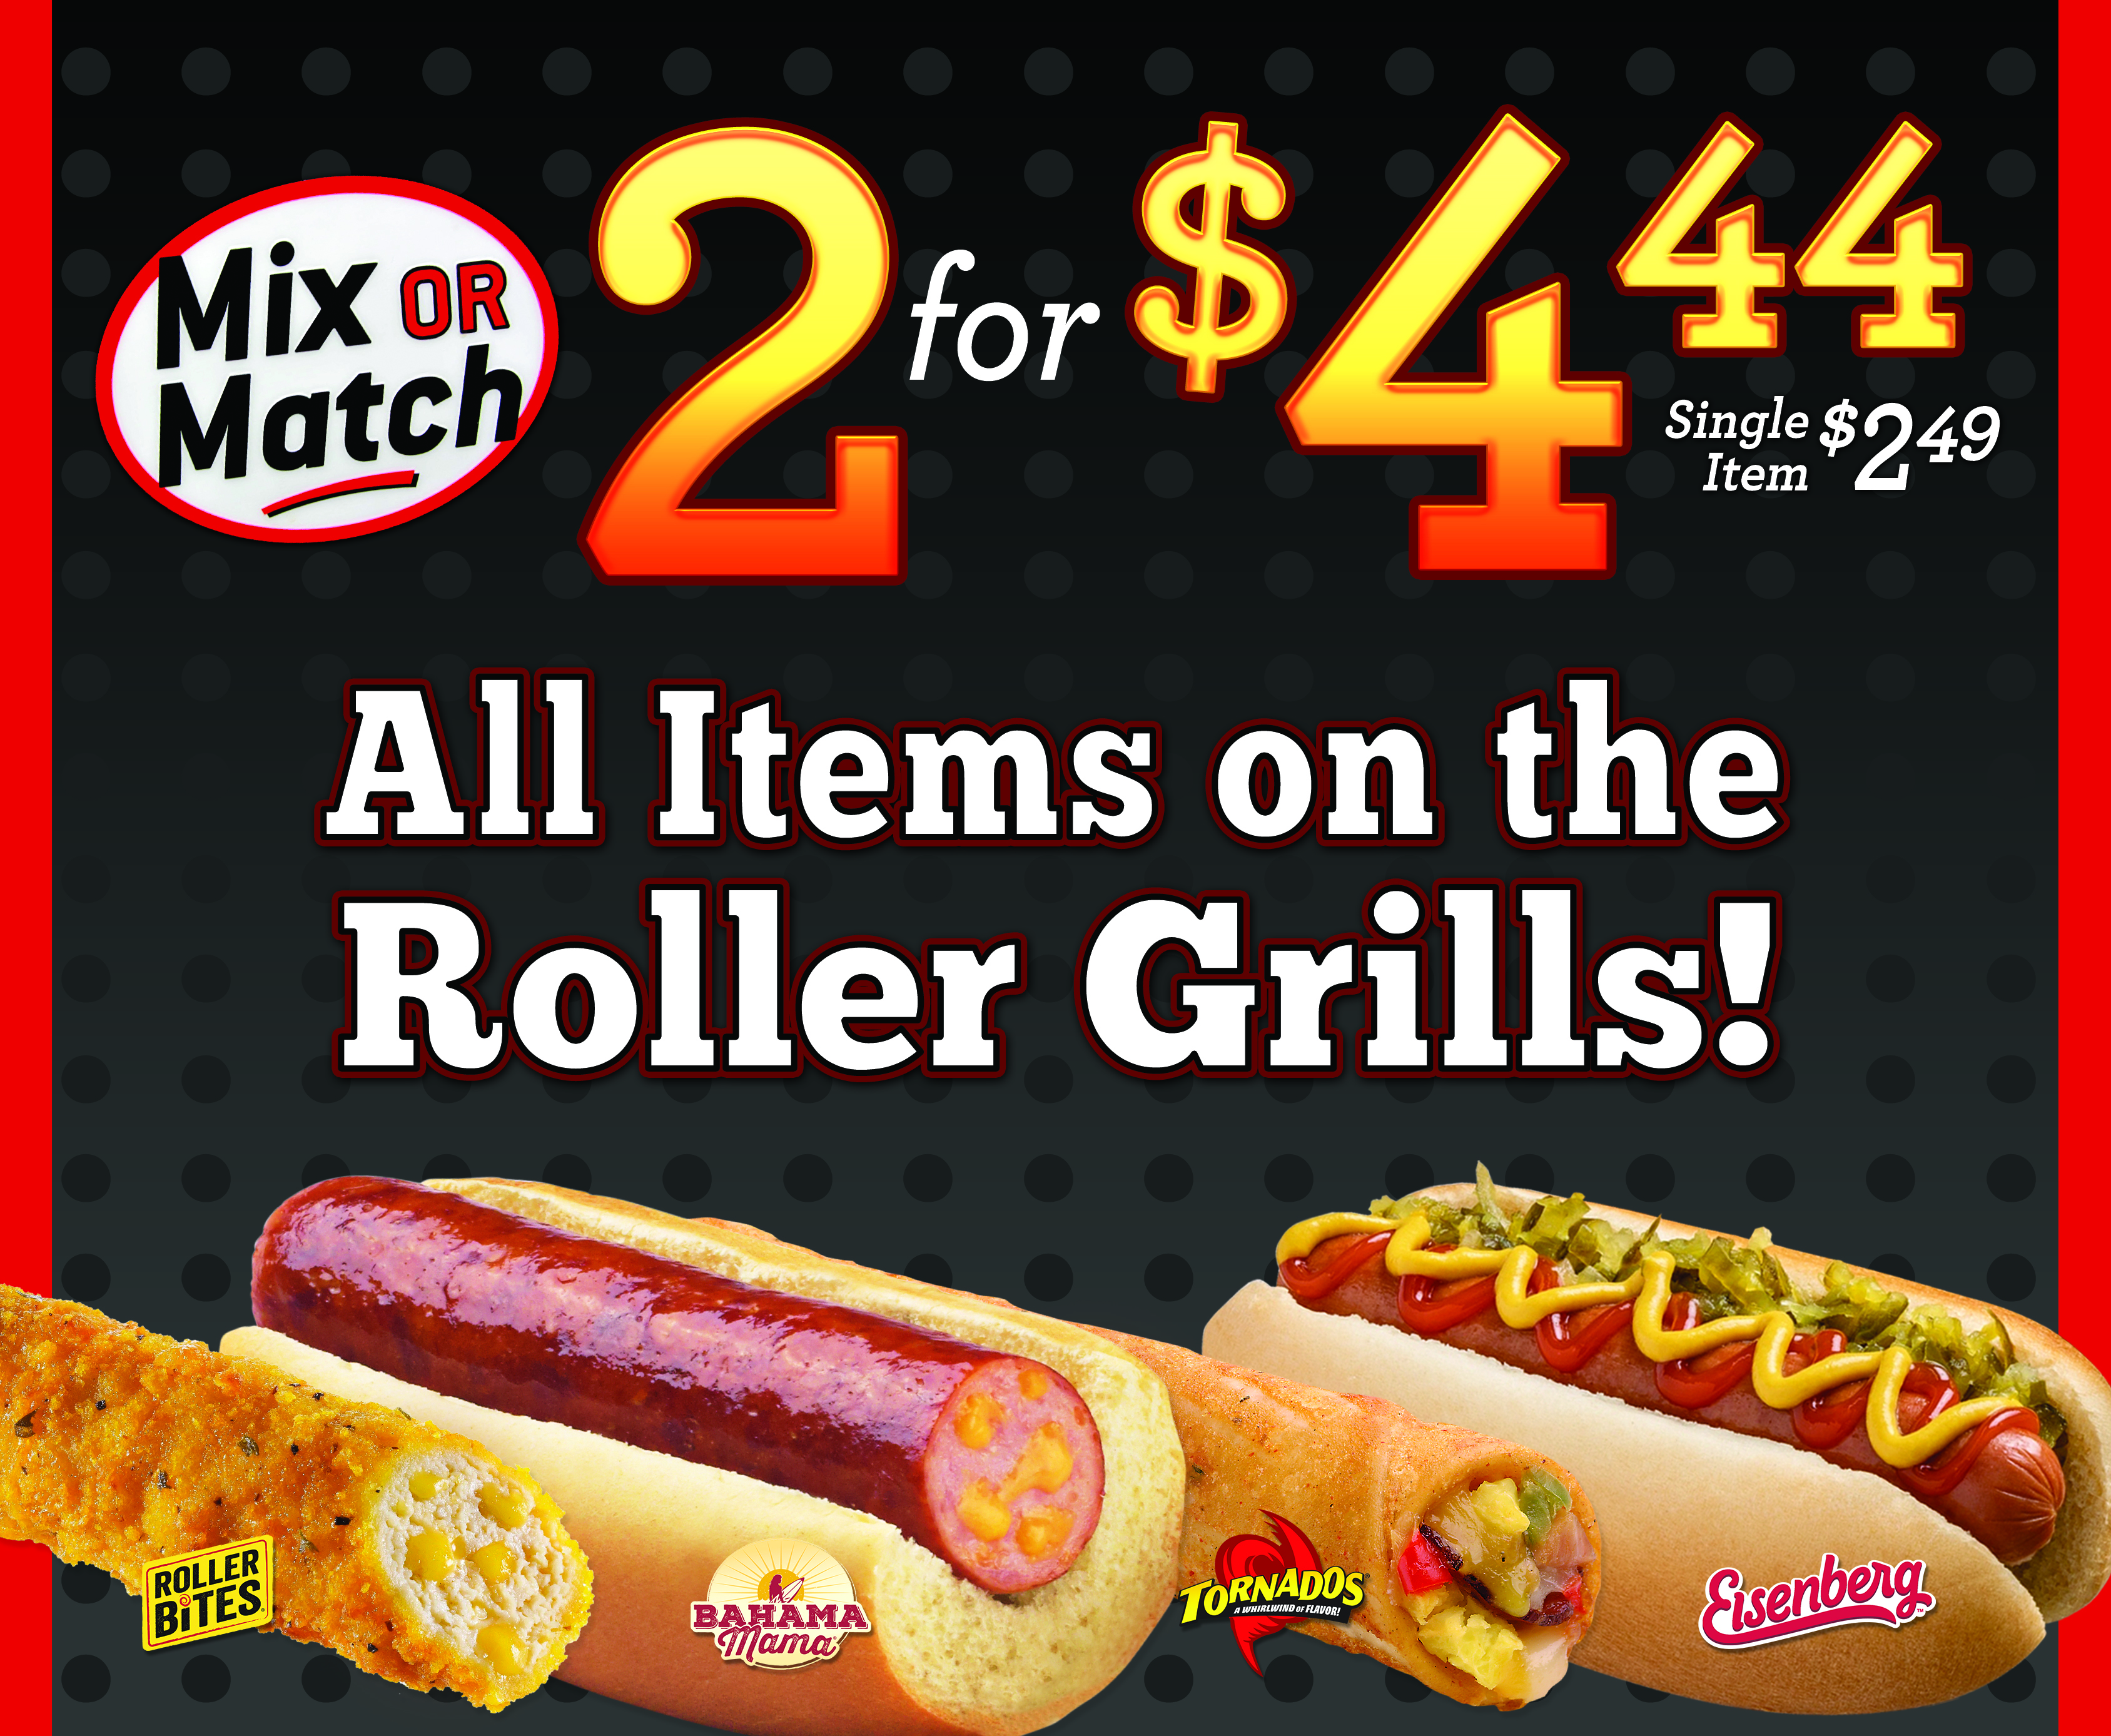 All Roller Grill Items